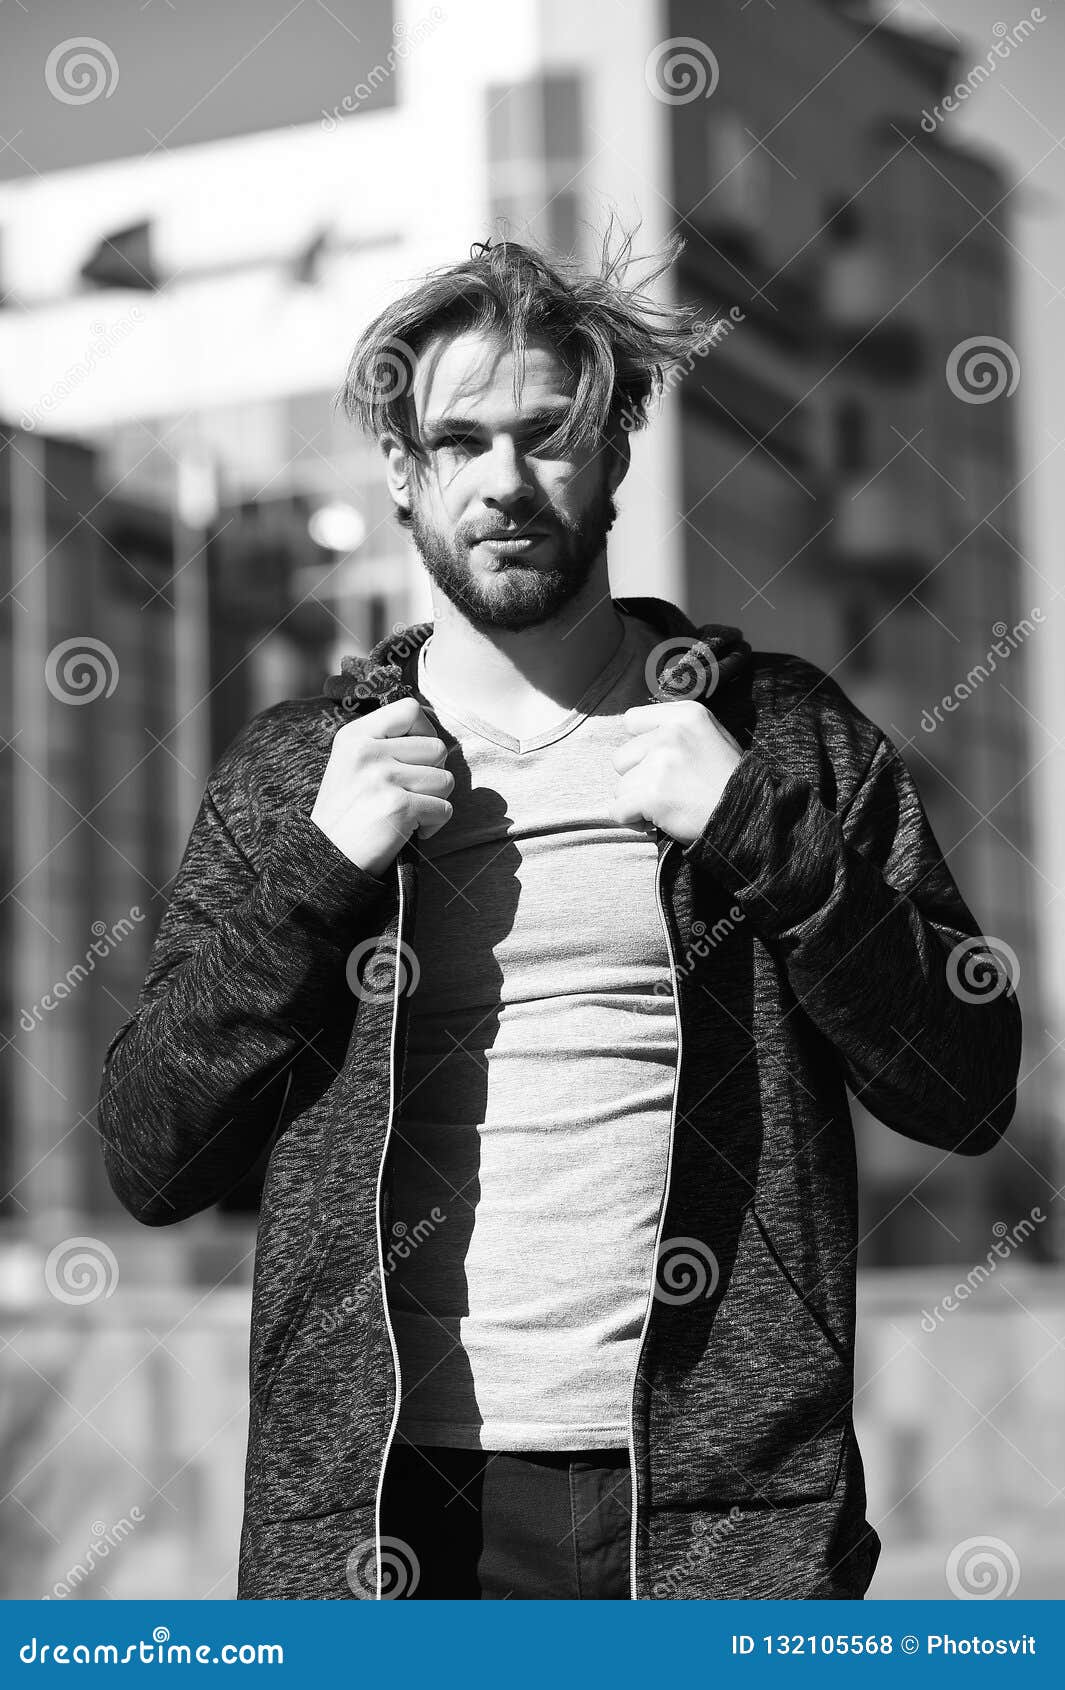 One More Step. Man Handsome Guy Enjoy Morning Walk Blue Sky Background Copy  Space. Morning Fill Energy Charge Stock Photo - Image of space, bearded:  139877746